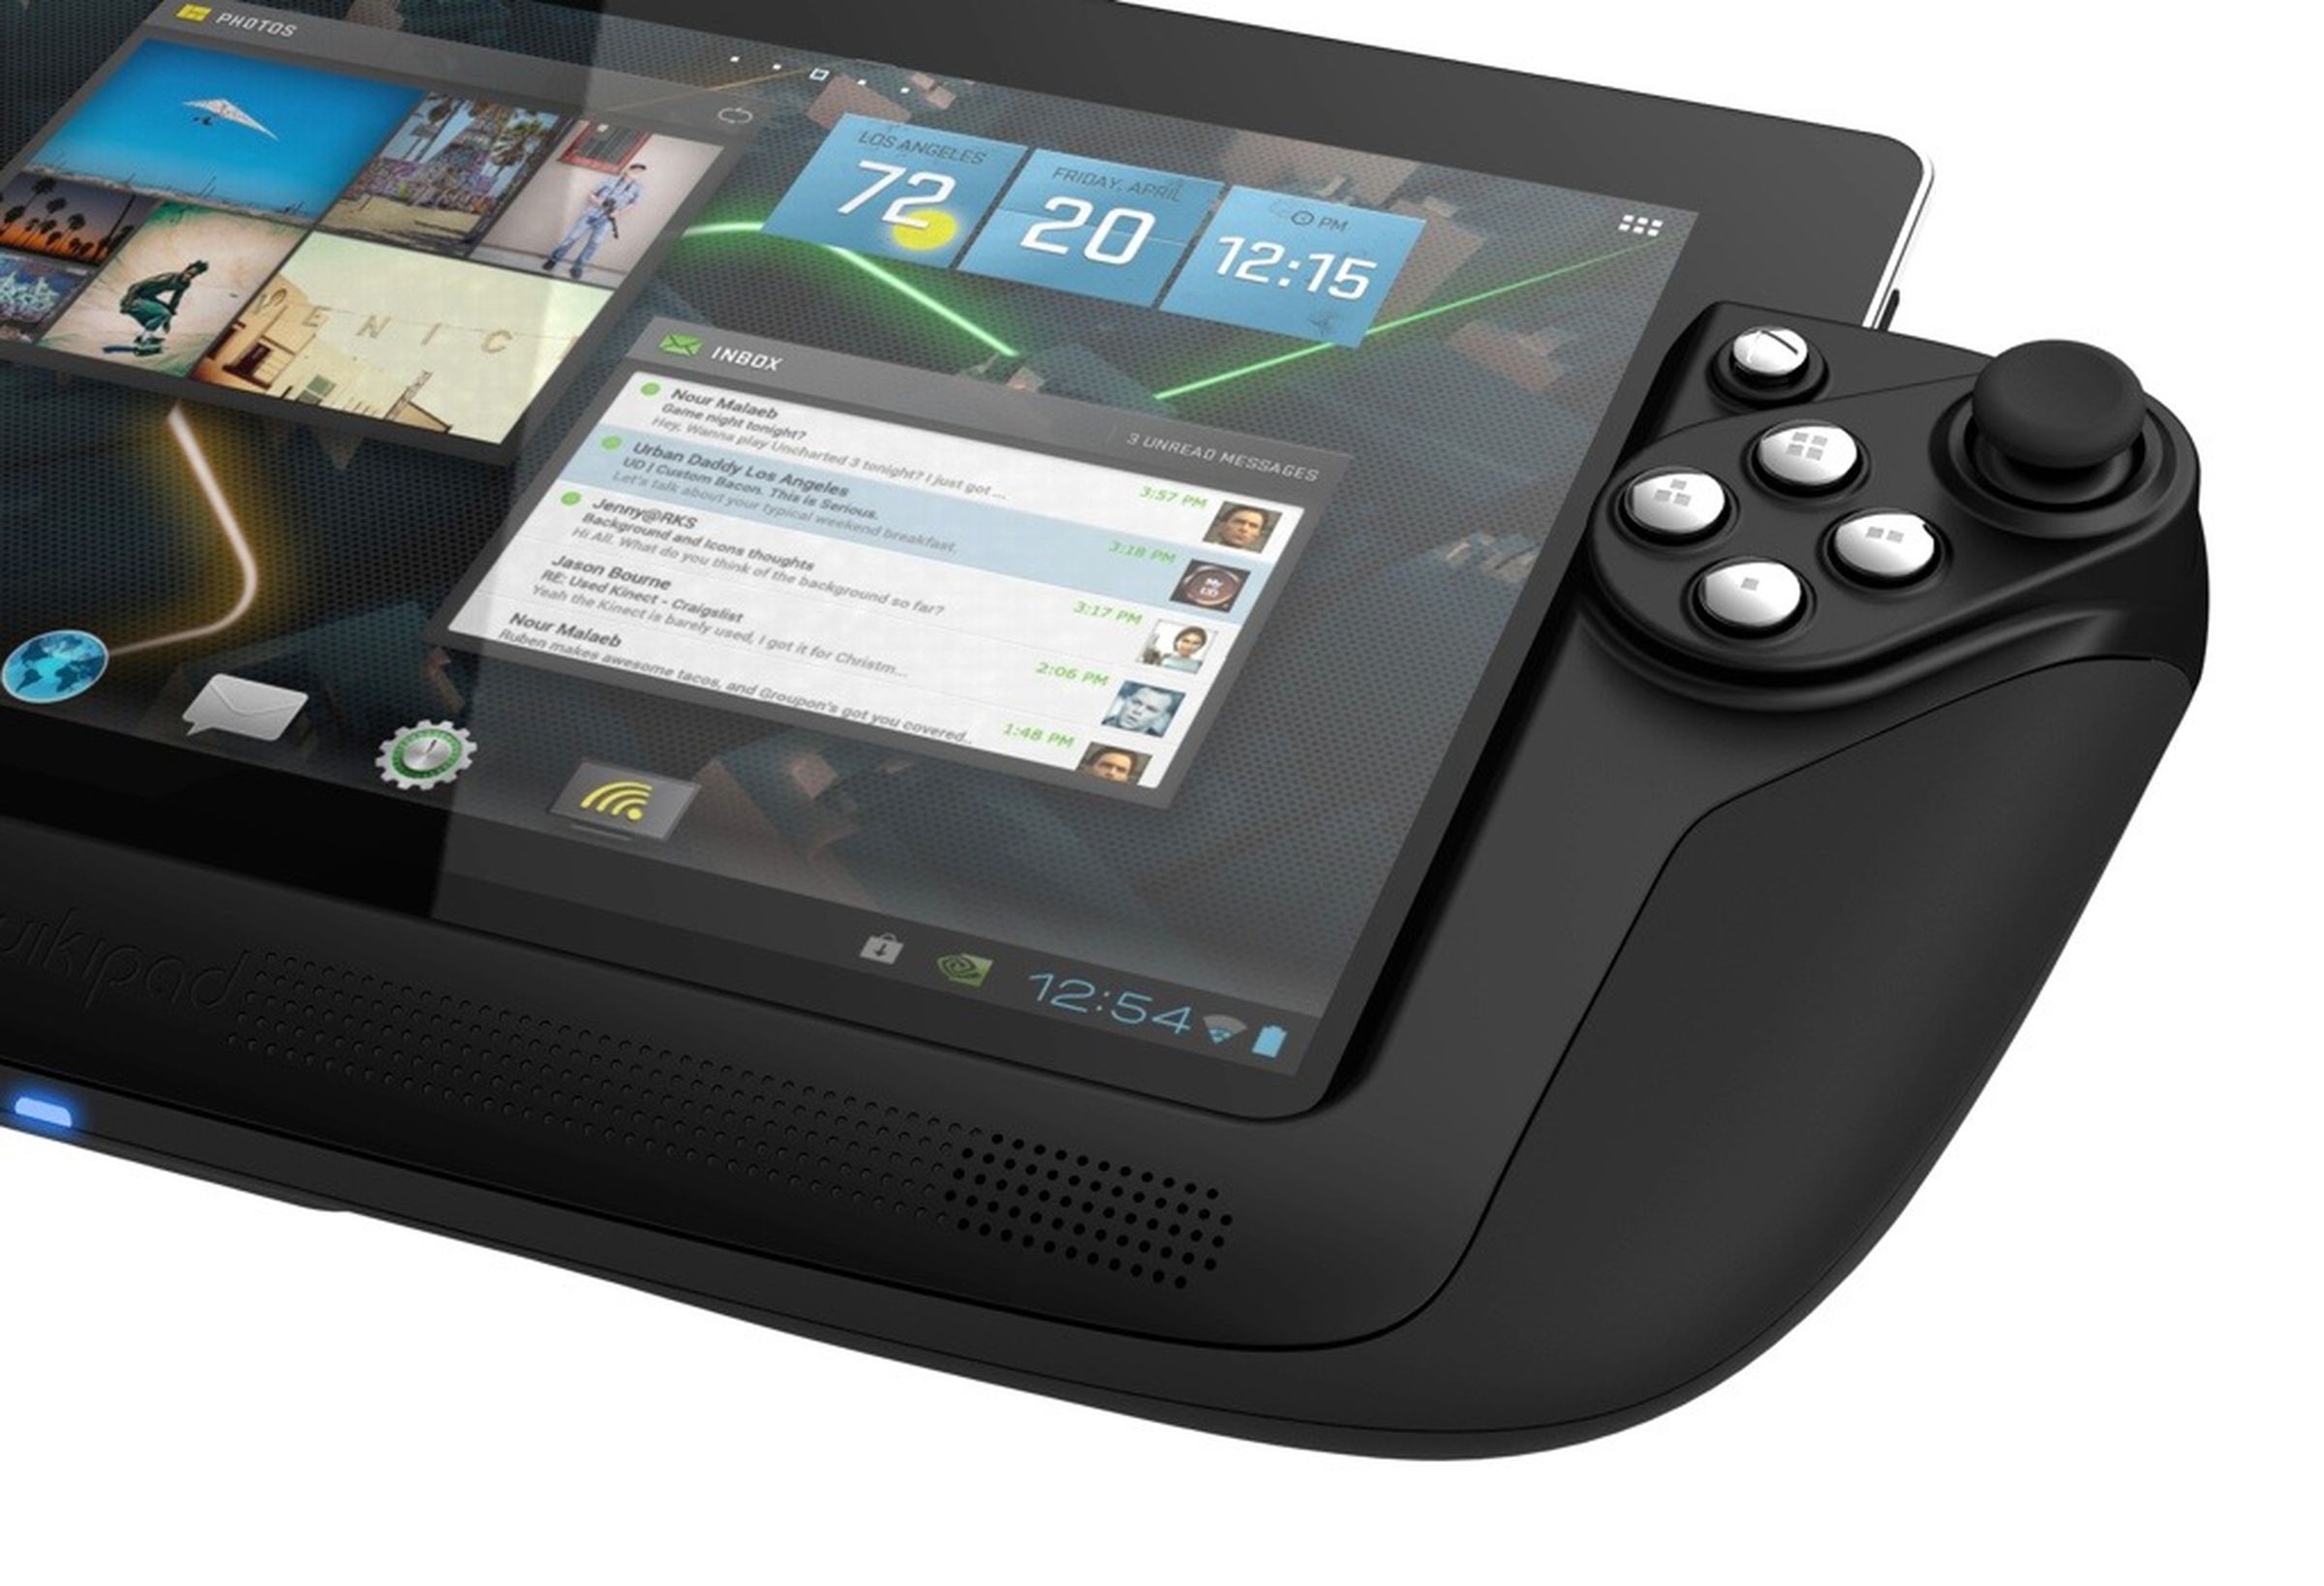 Wikipad gaming tablet press pictures